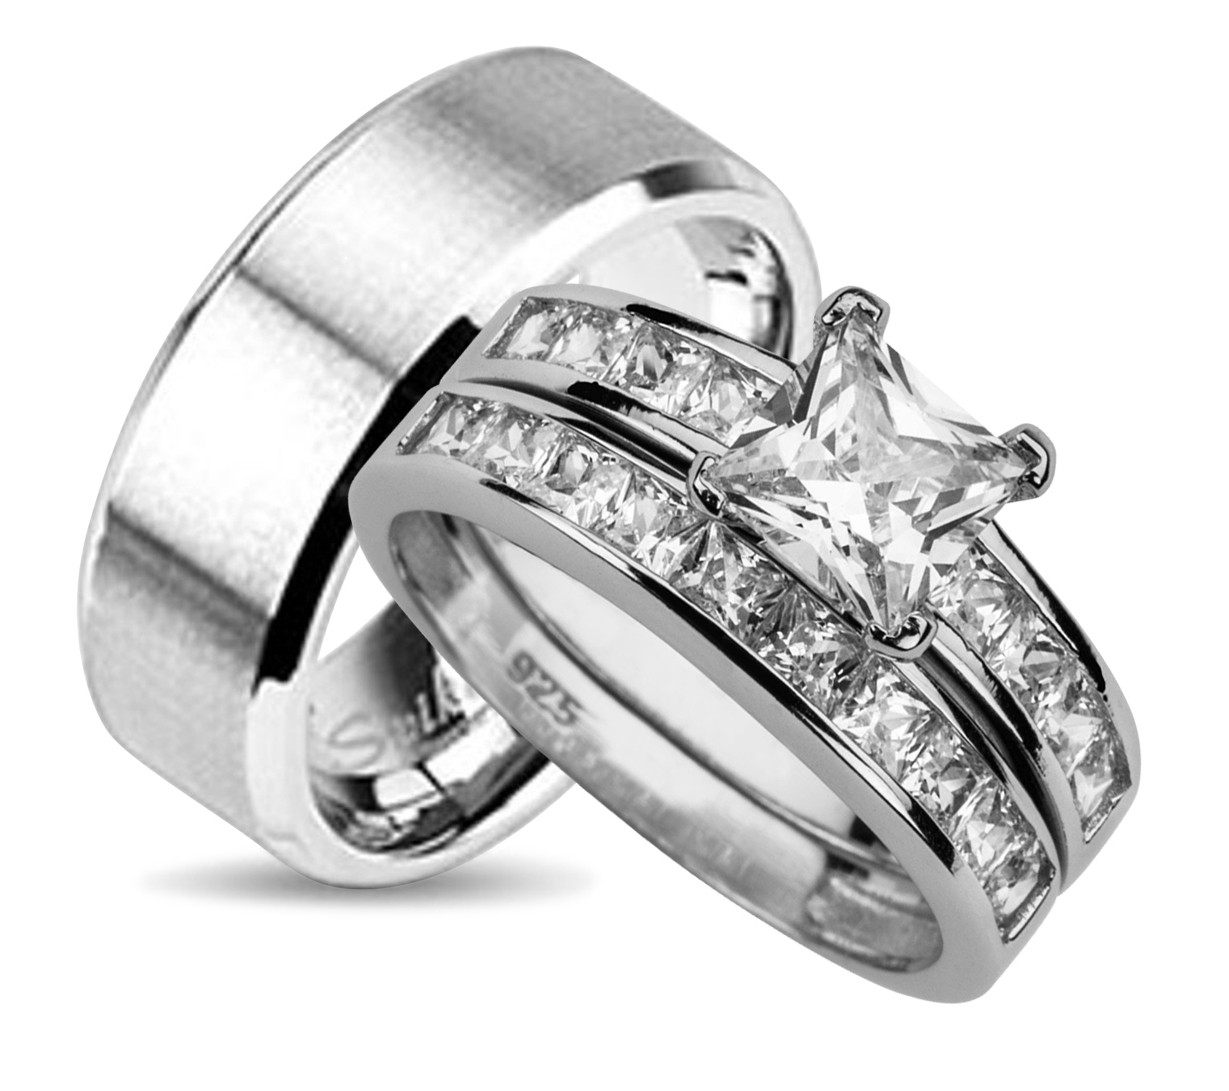 Wedding Ring Sets For Her And Him
 LaRaso & Co His and Hers Wedding Ring Set Matching